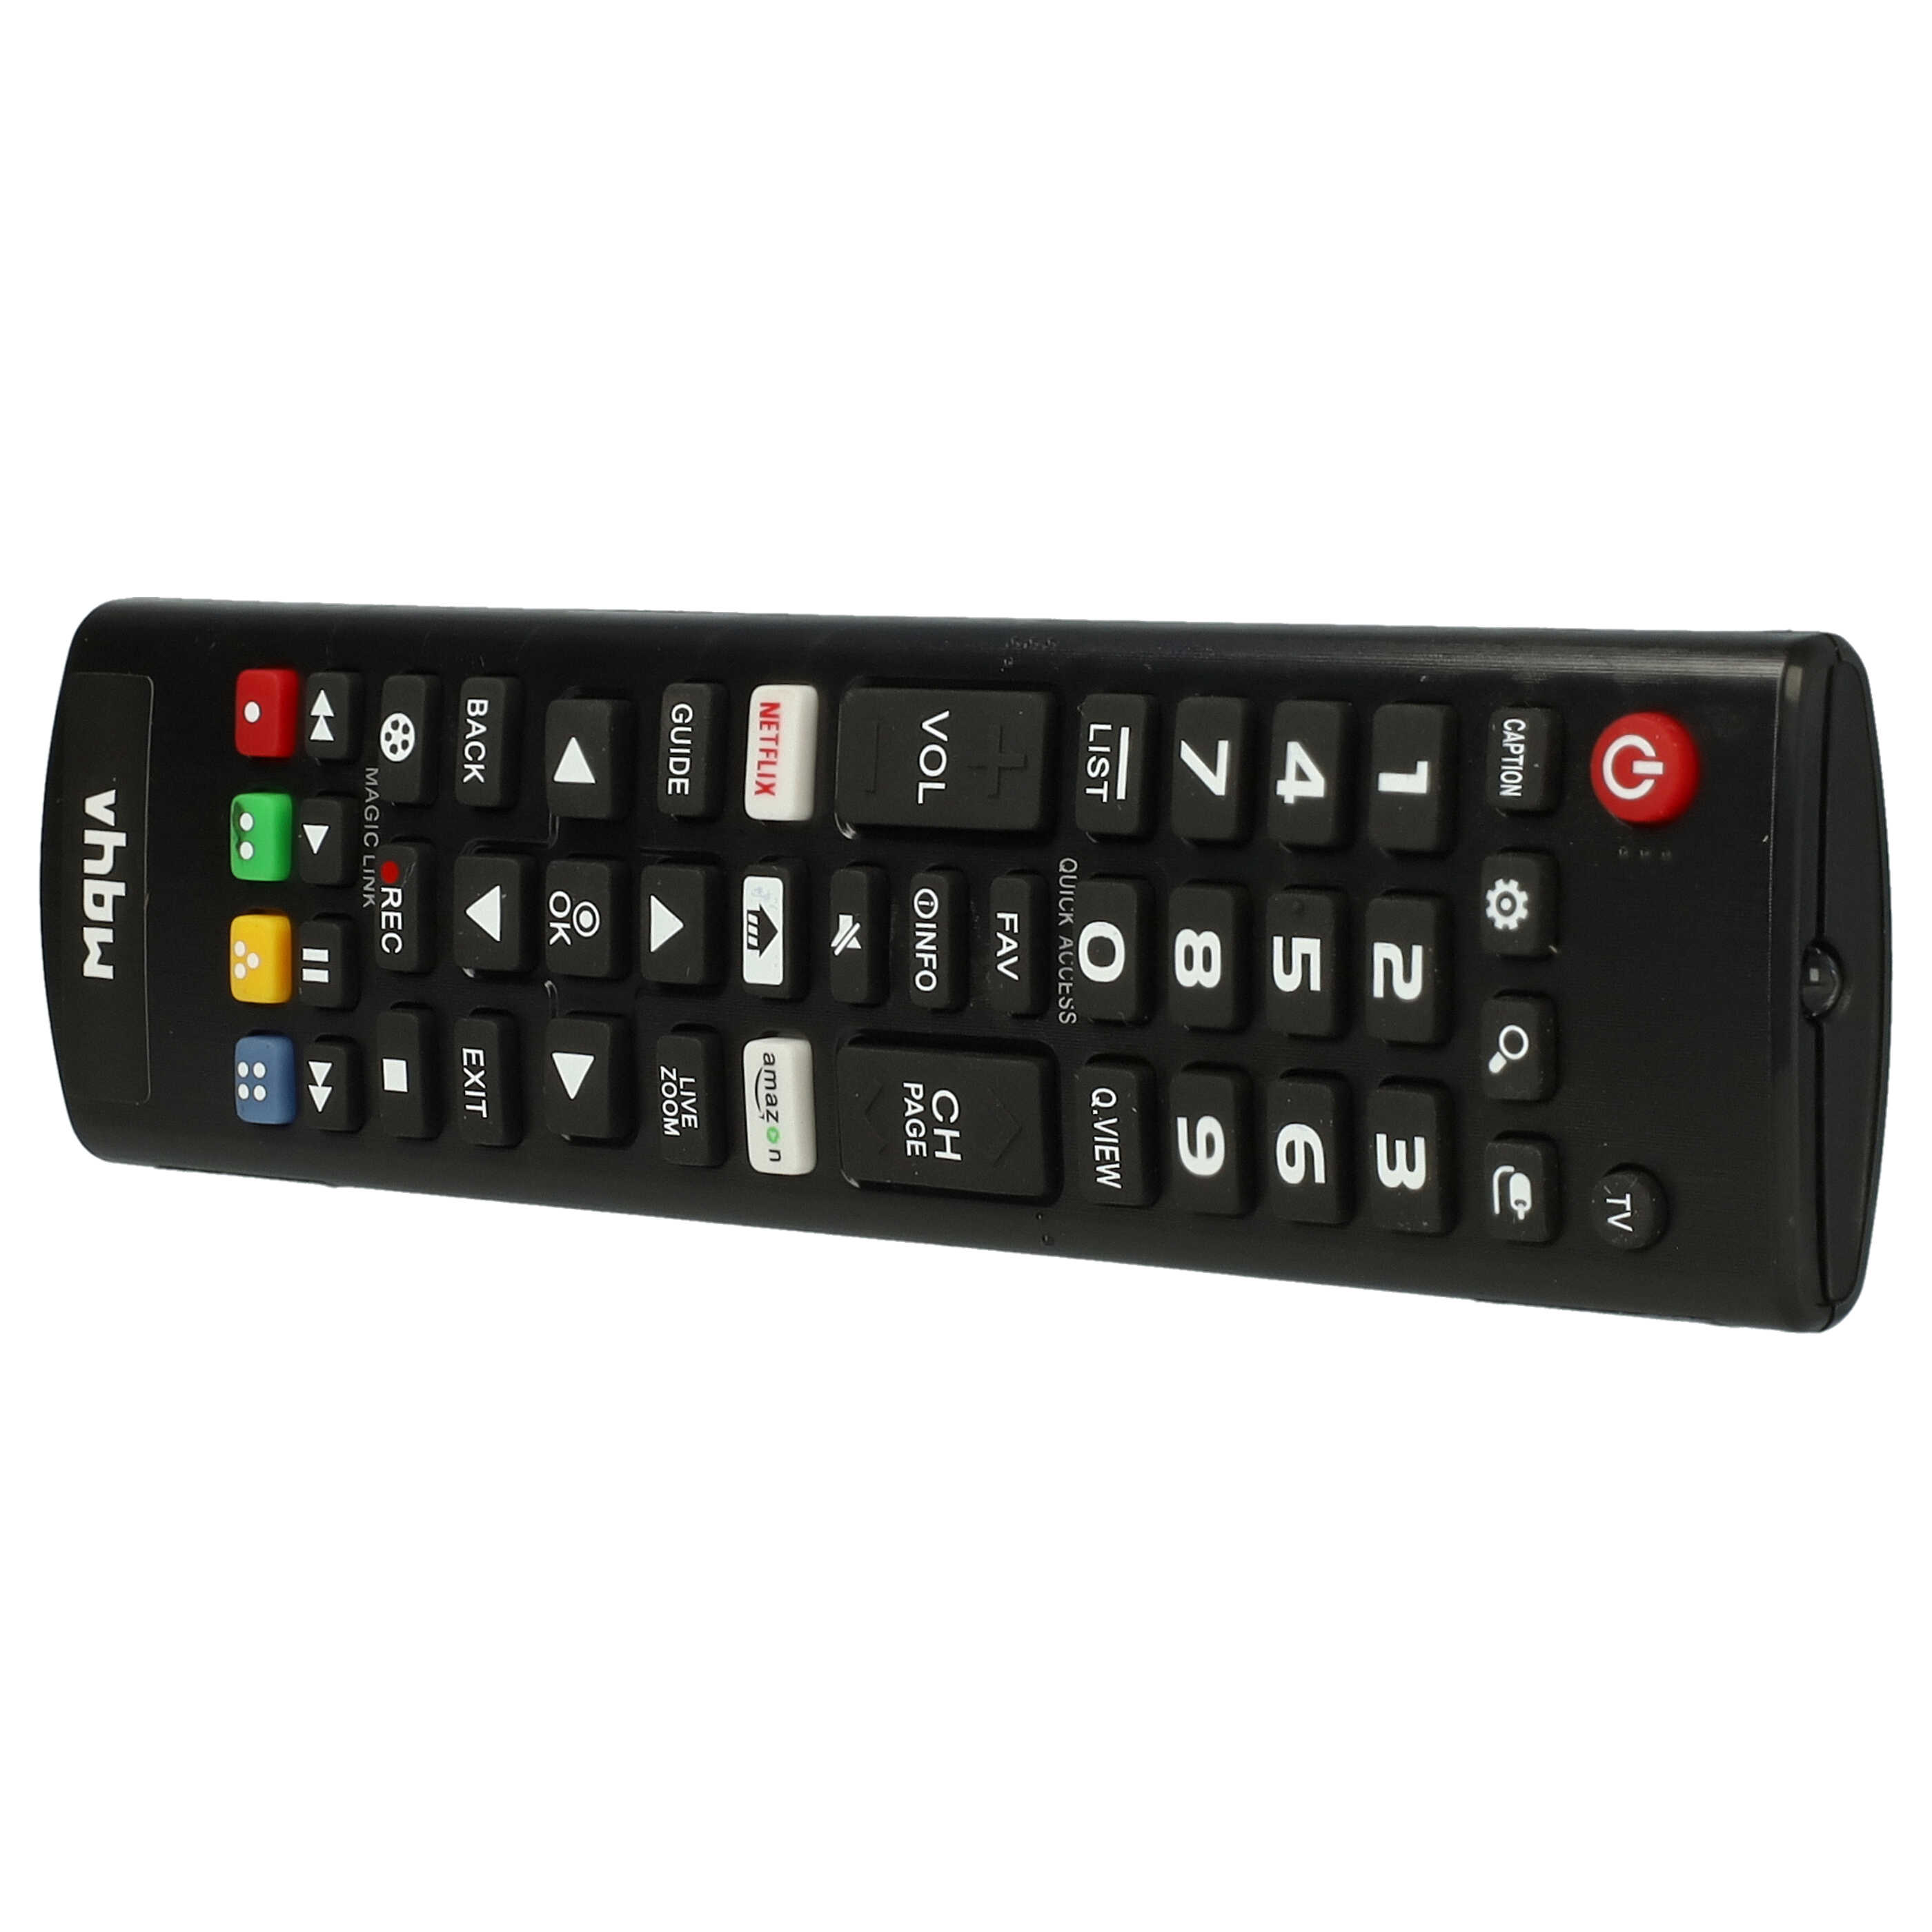 Remote Control replaces LG AKB75095315 for LG TV